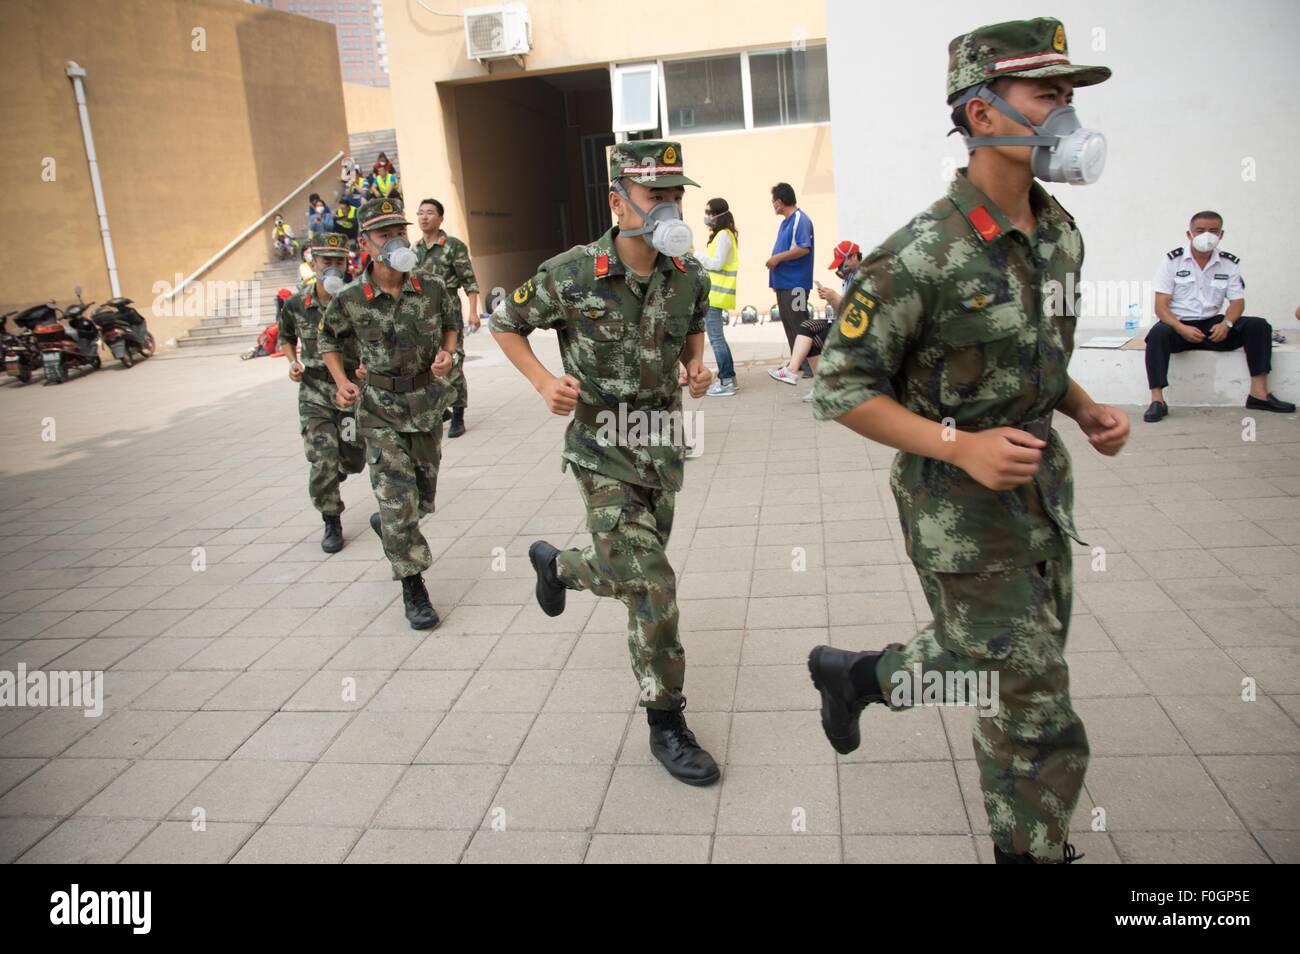 China. 15th Aug, 2015. Soldiers seen wearing gas masks in the exclusion zone as the authority had confirmed the existent of toxic gas in the area. The death toll has risen to 104. Local authority starts to evacuate local residents from the temporary camp located at a local school near the blast zone as they extend the exclusion zone to 3 km from where the explosion happened as poison air which could cause cancer is being detected. © Geovien So/Pacific Press/Alamy Live News Stock Photo